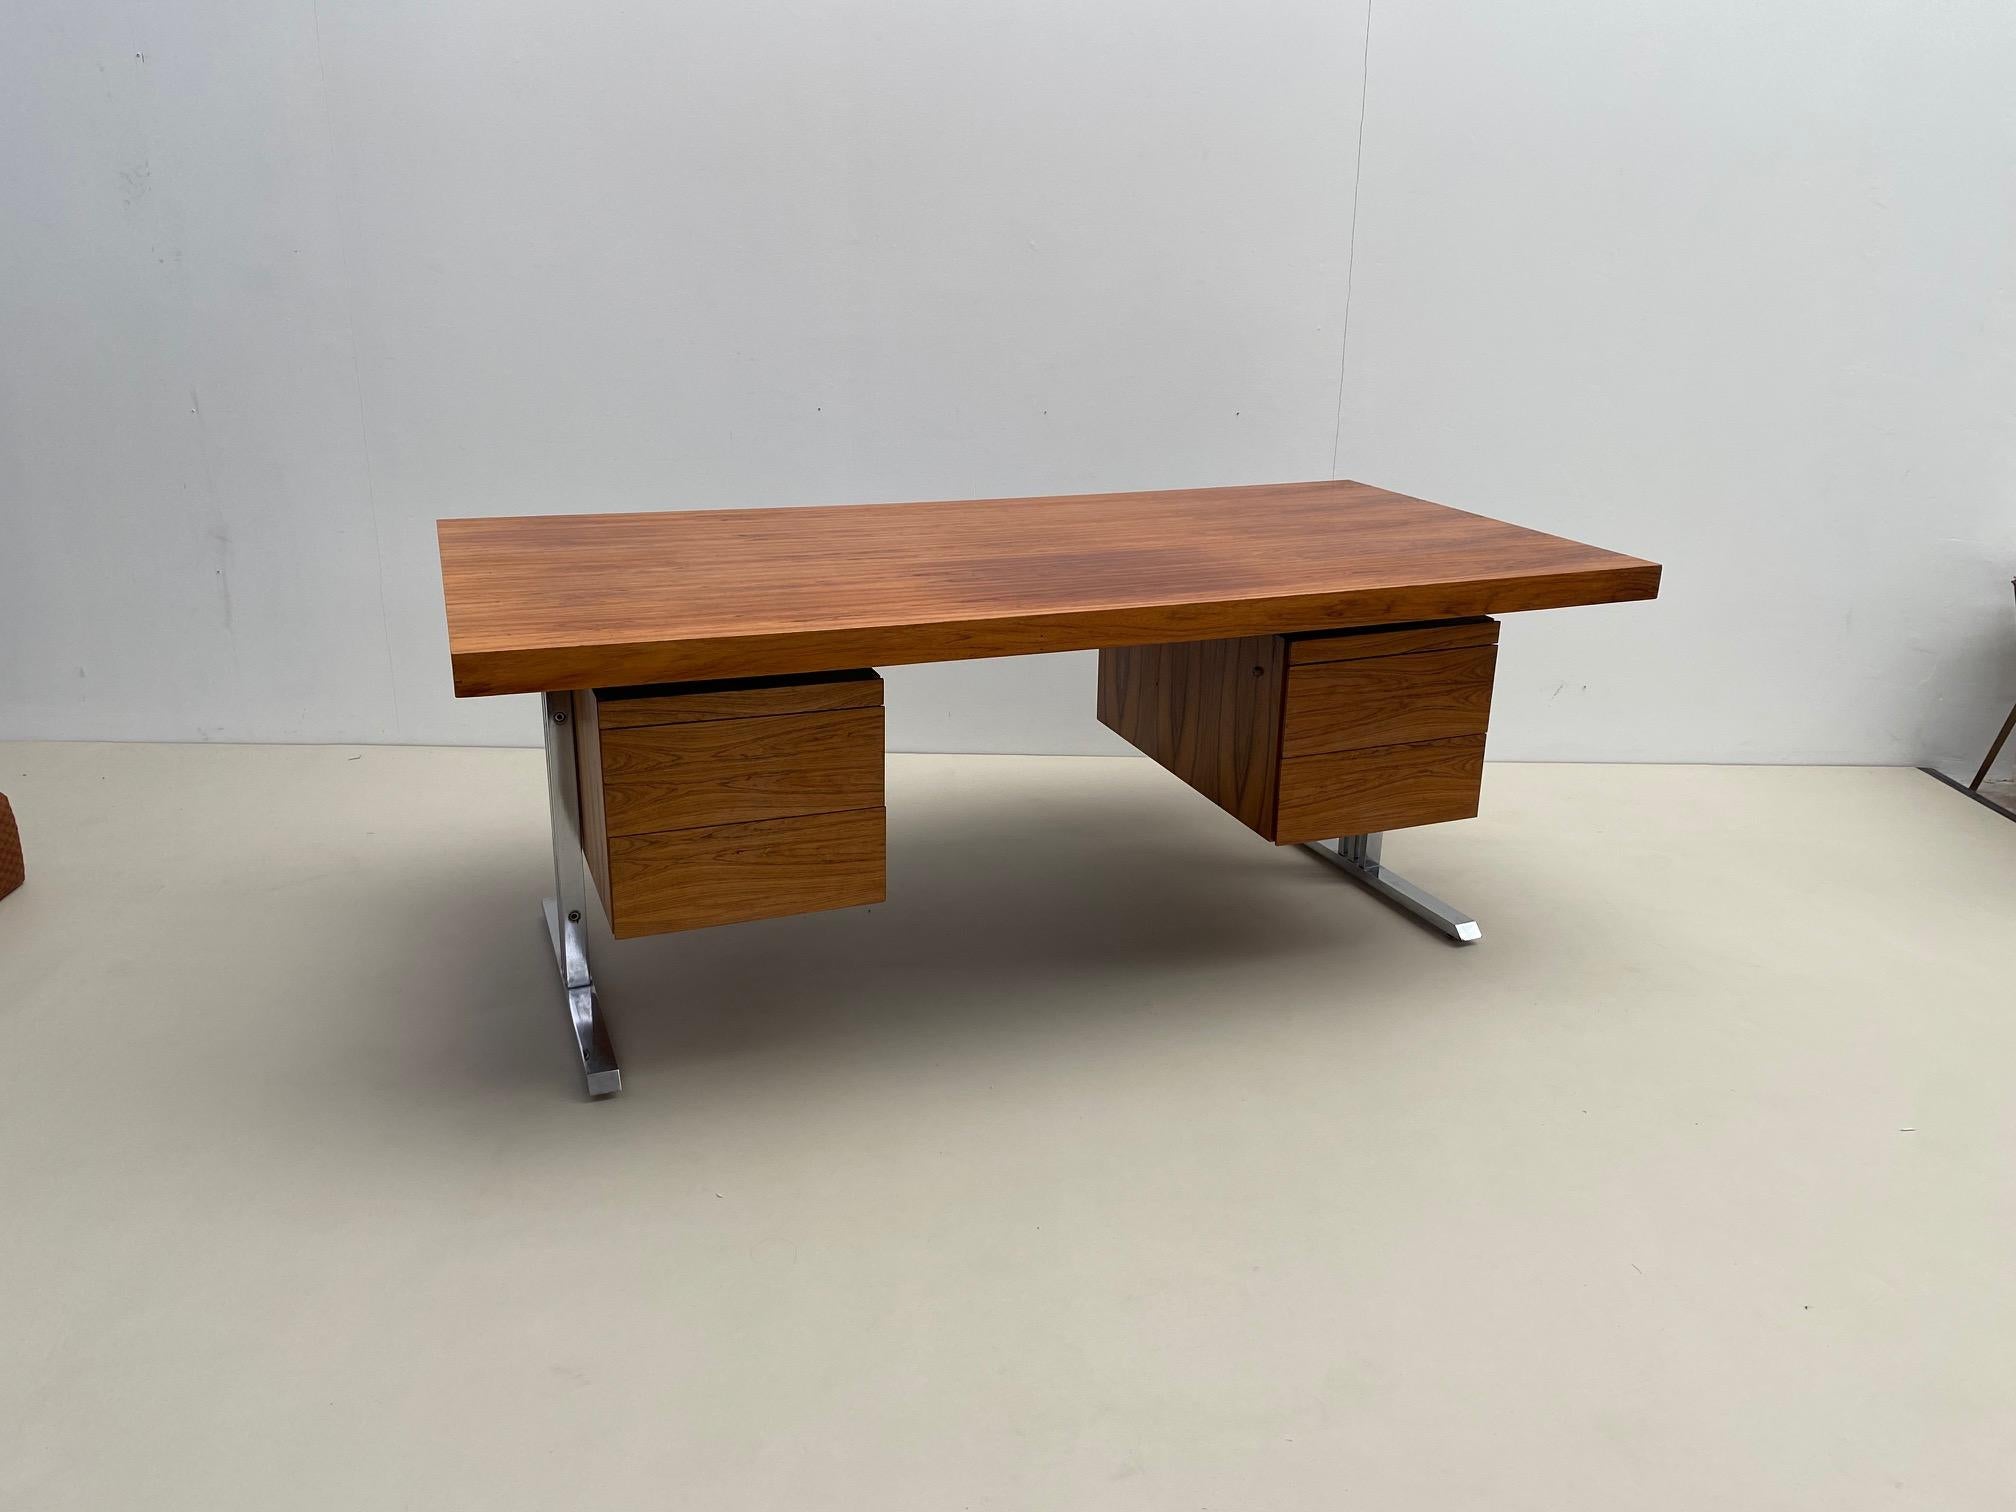 Mid-Century Modern Italian Desk with Drawers , Wood and Chrome, 1970s For Sale 5